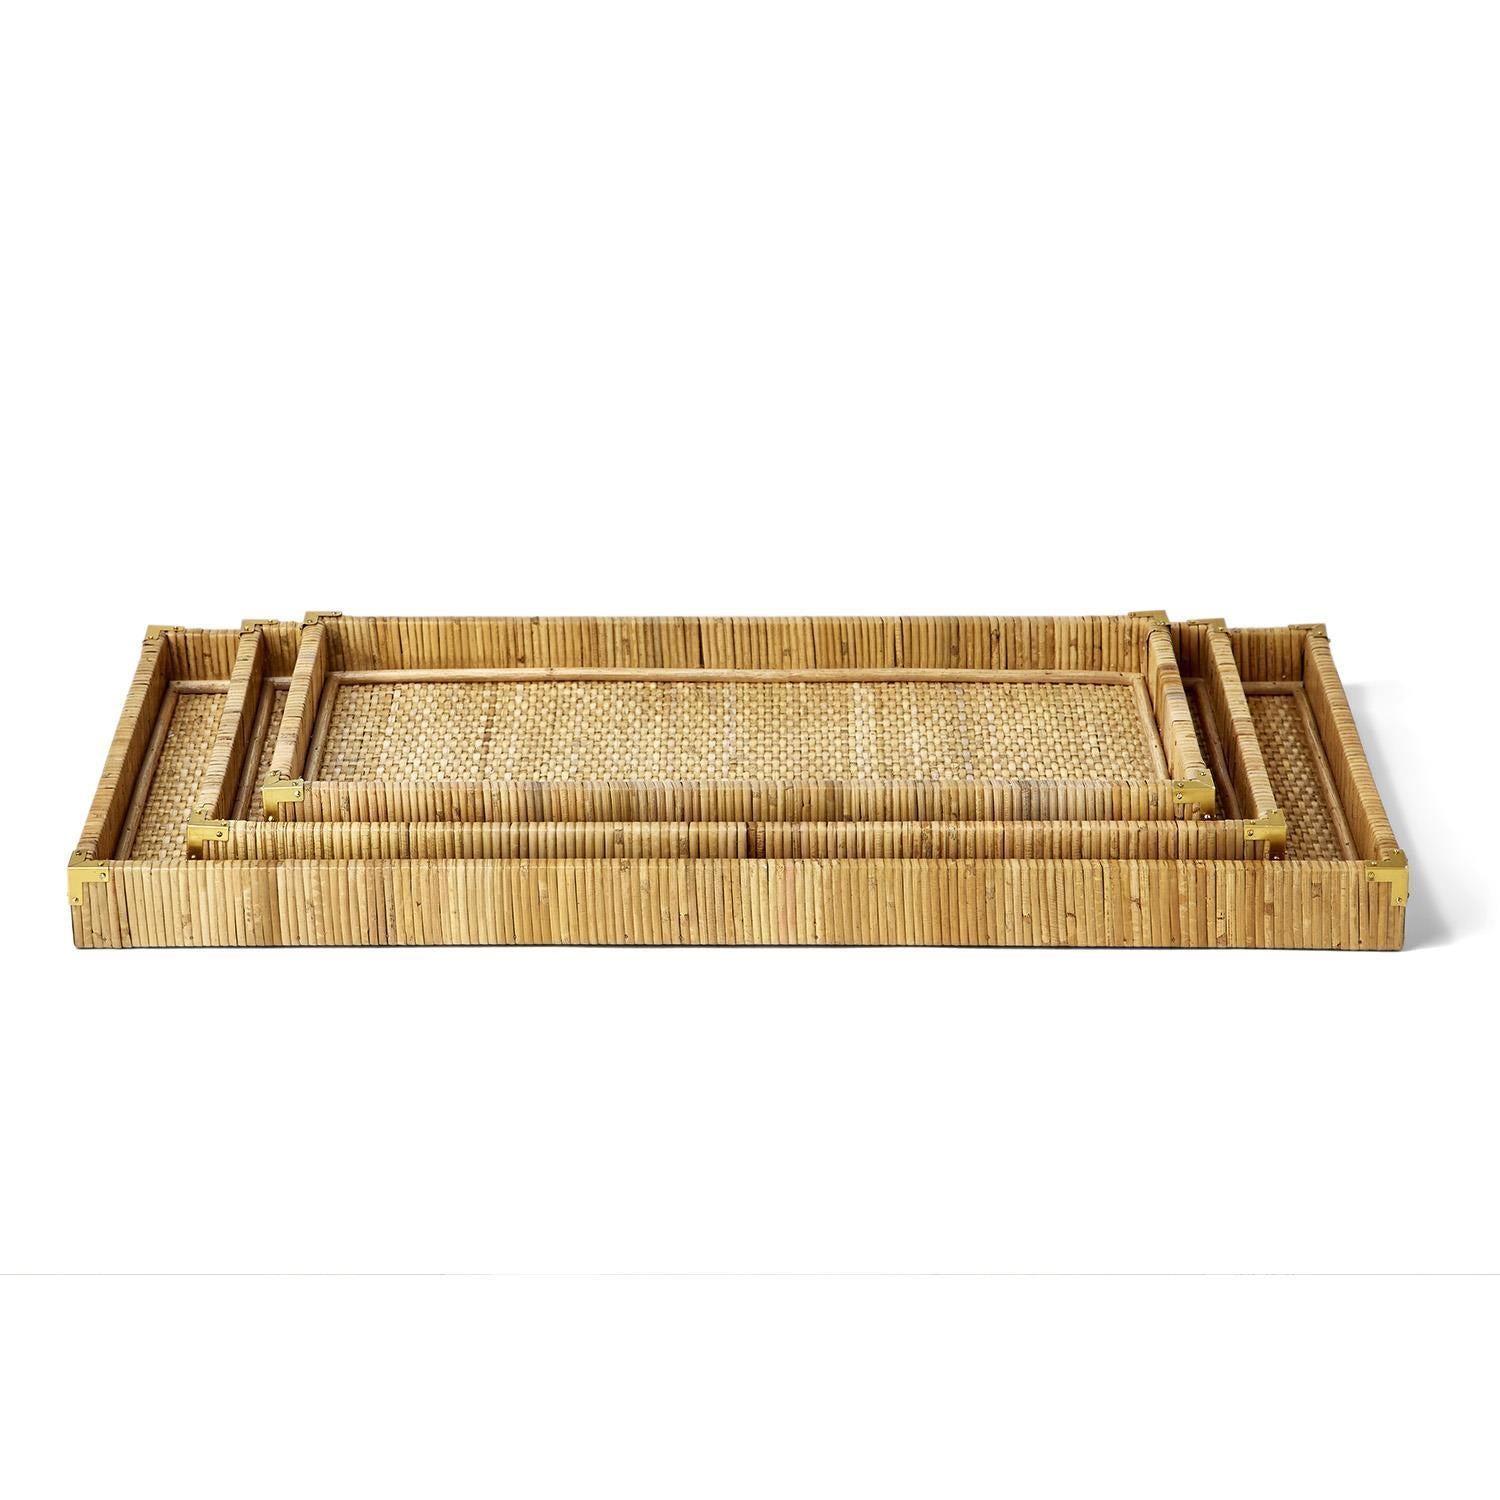 Dream Weavers Decorative Hand-Crafted Natural Rattan Oversized Trays